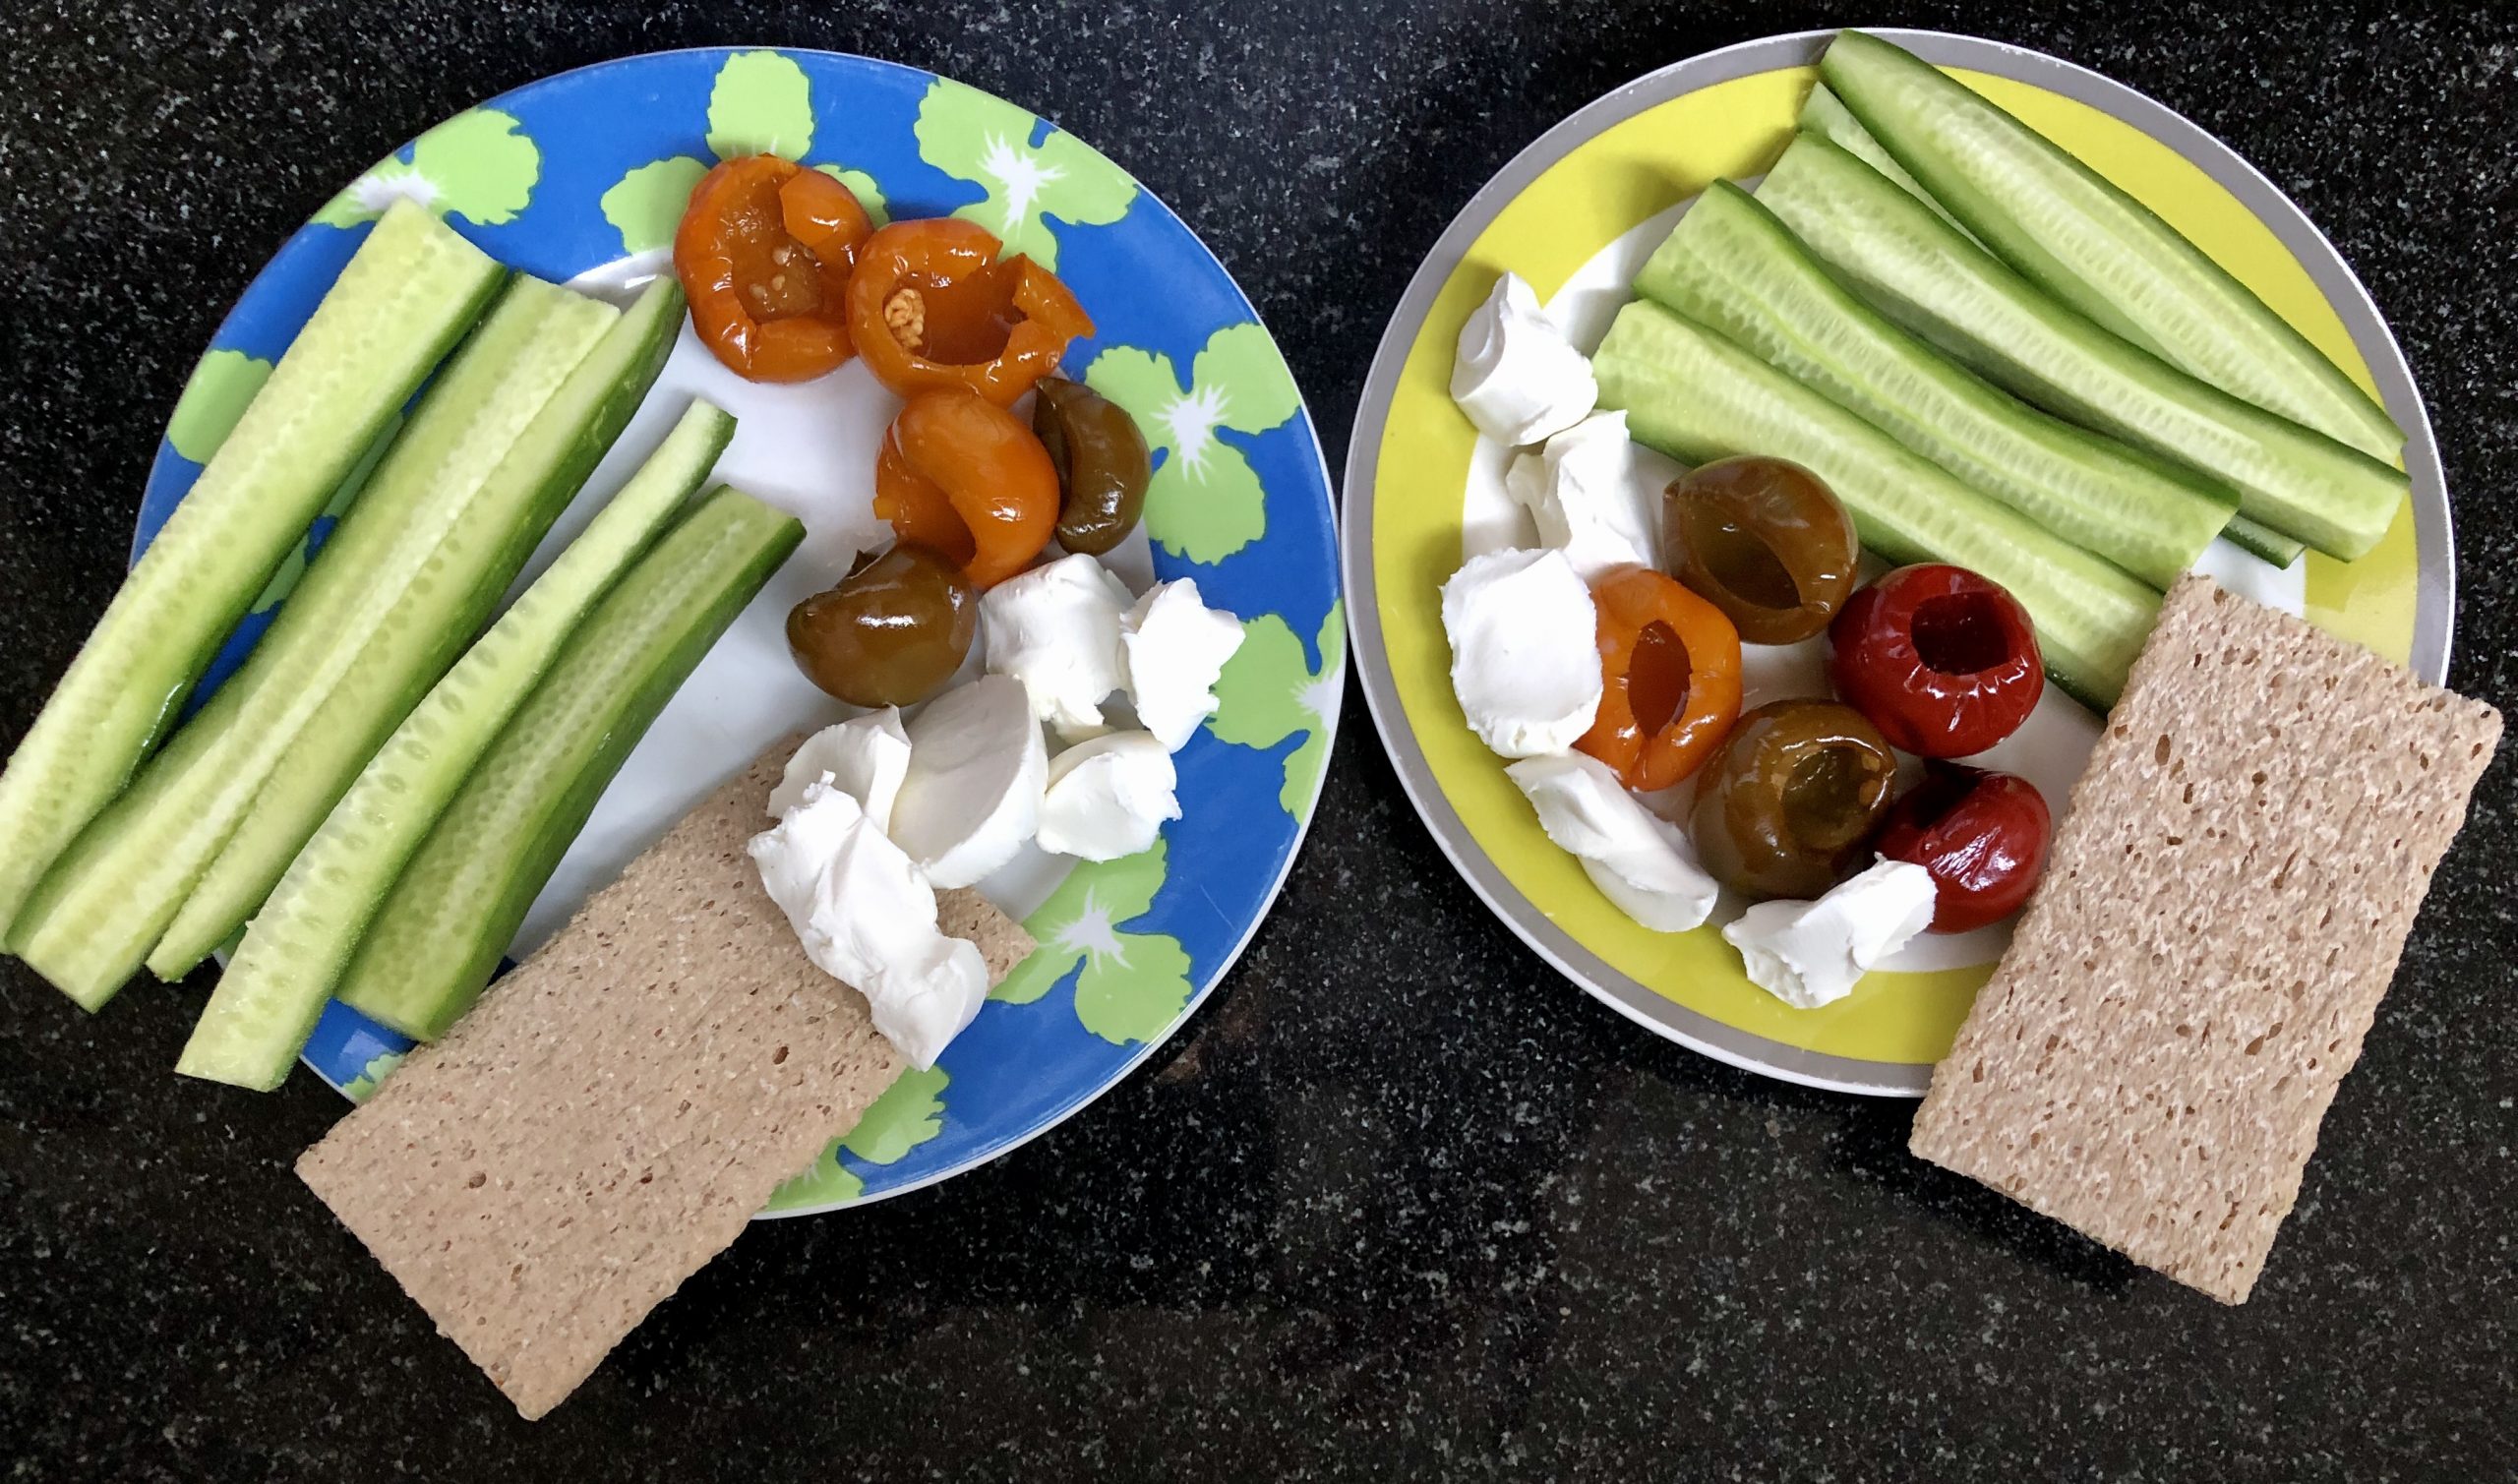 Mediterranean diet breakfast: marinated mini peppers, cucumbers, goat cheese and crackers